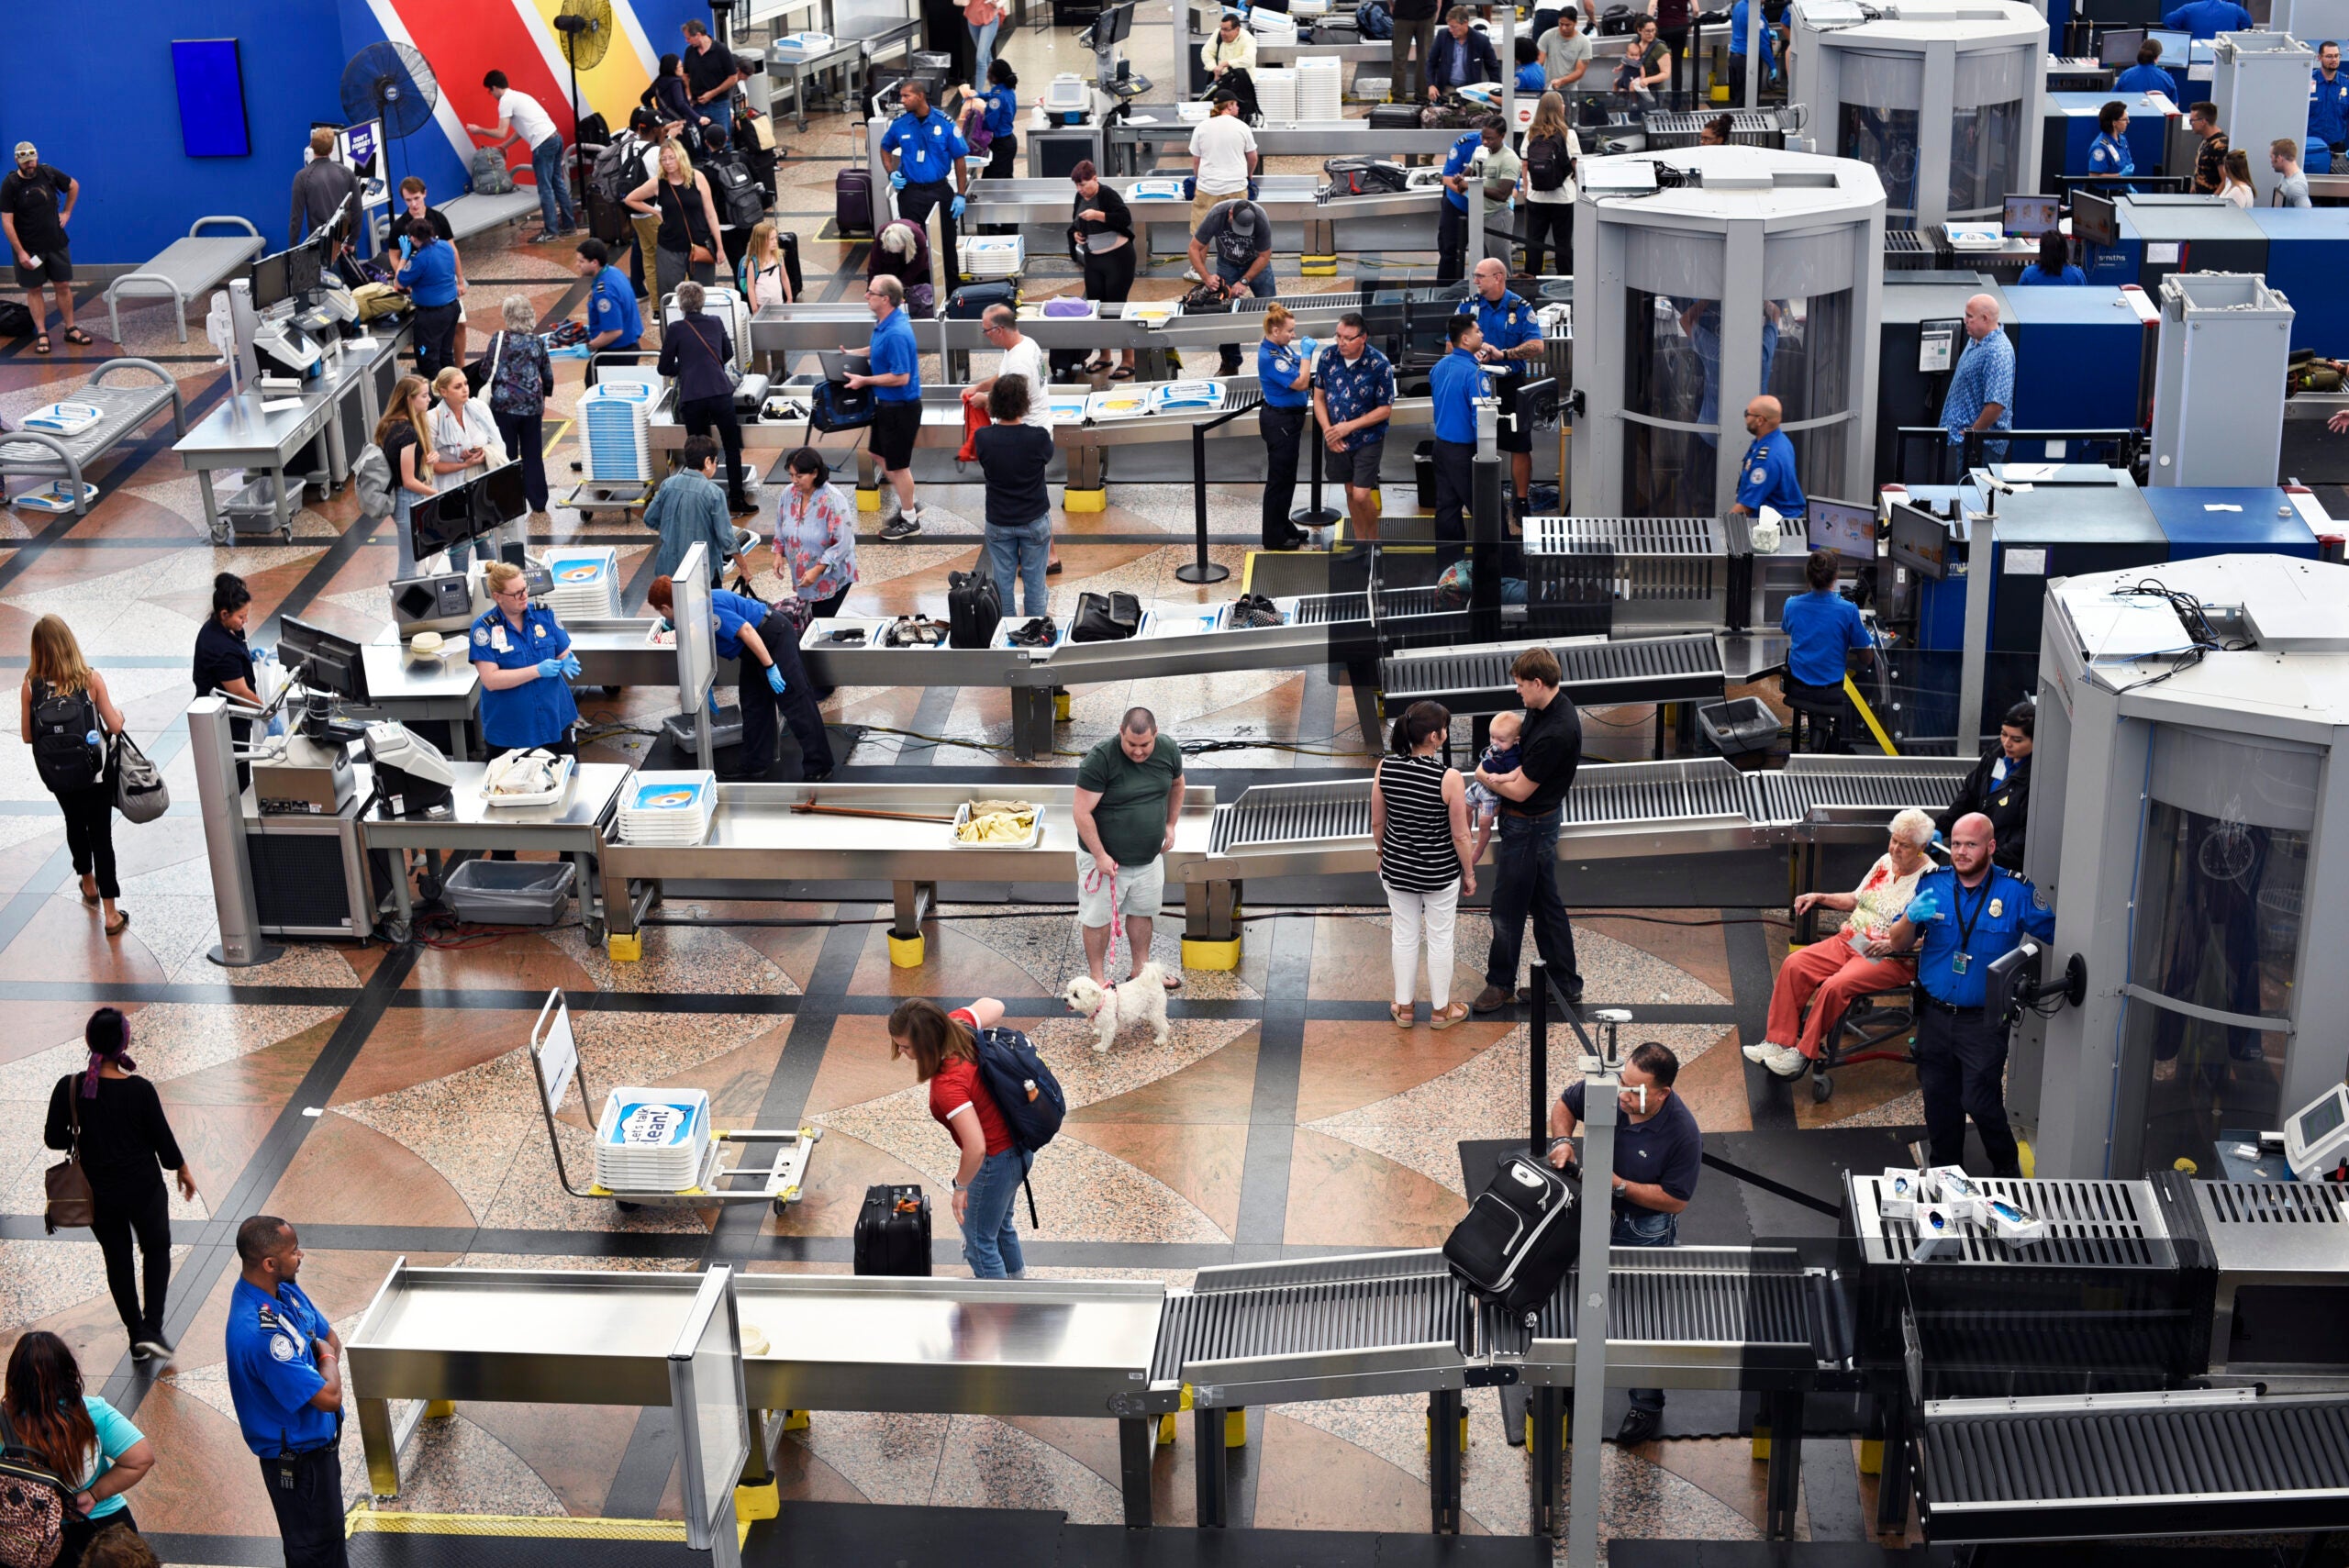 Passengers proceed through the TSA security checkpoint at Denver International Airport